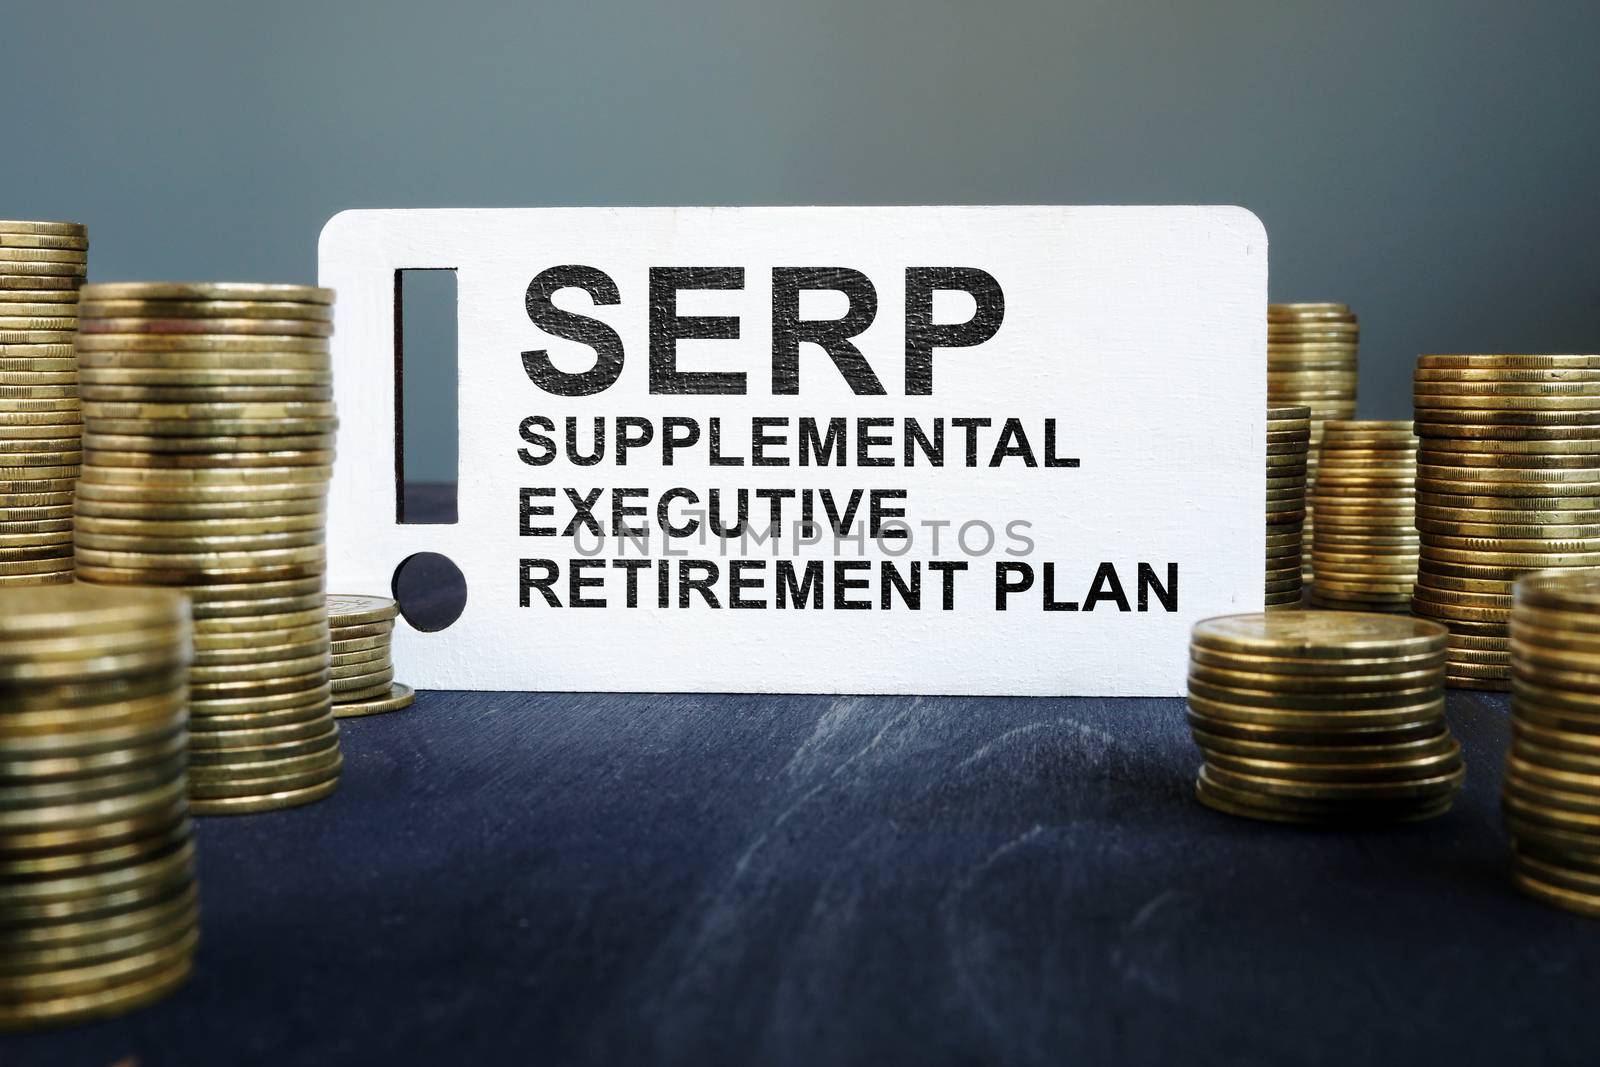 Supplemental Executive Retirement Plan SERP and stack of coins.